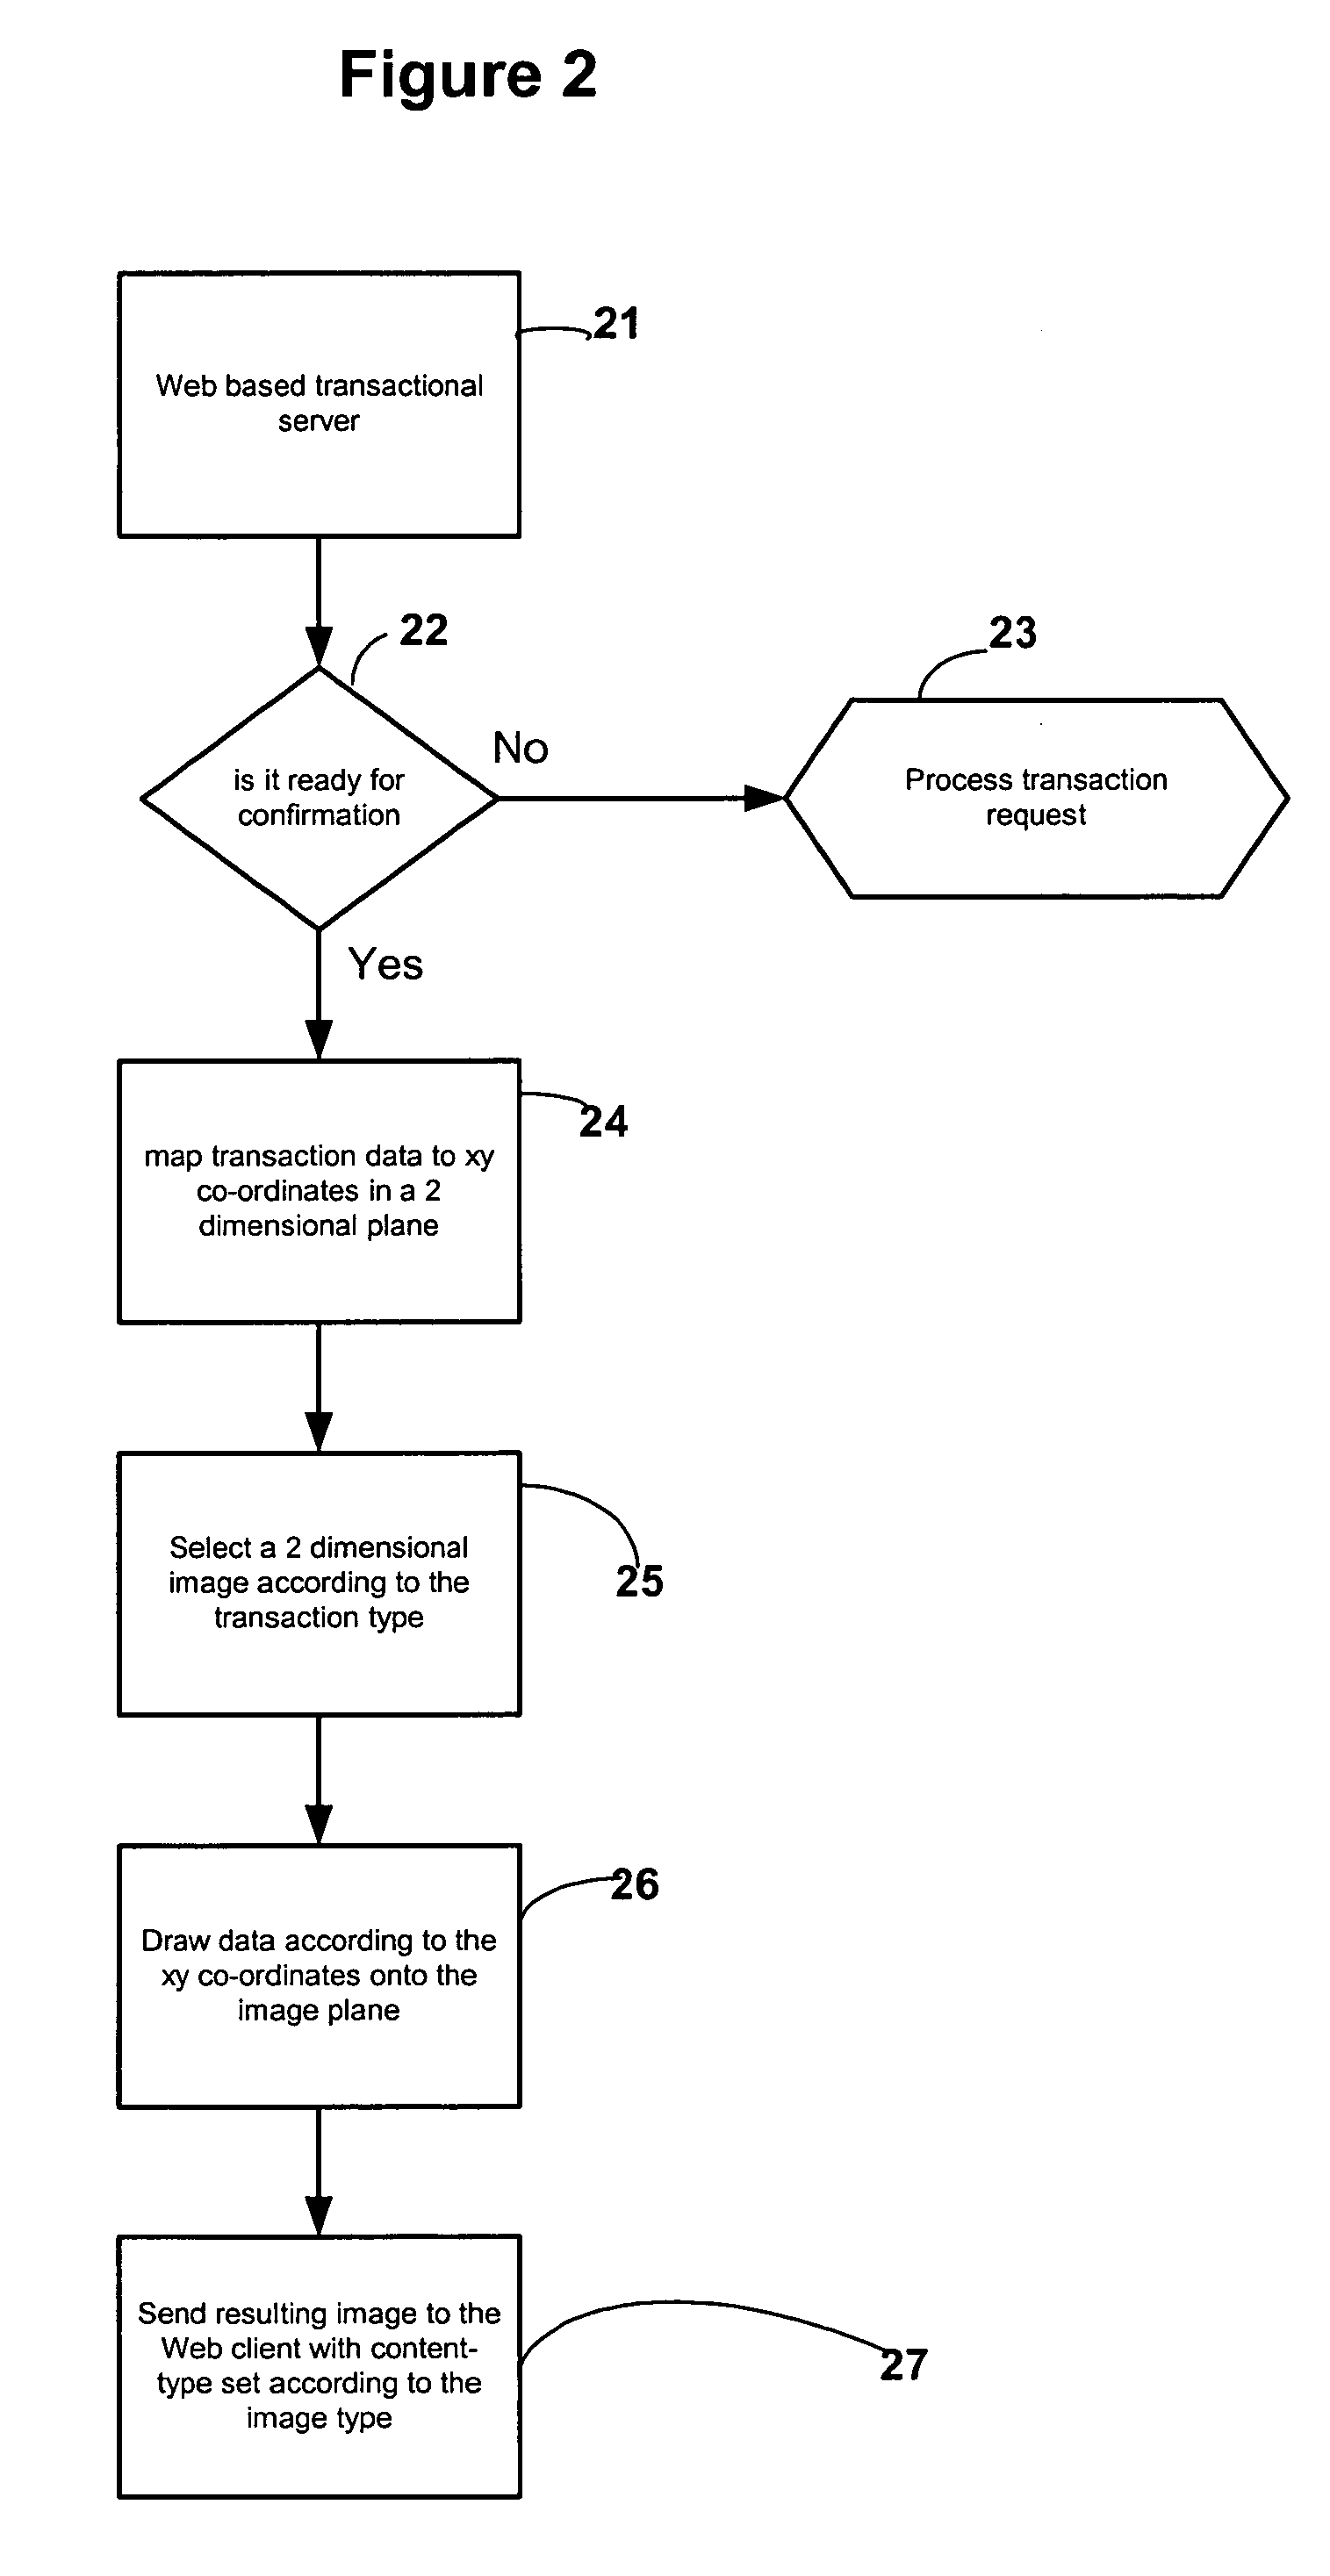 Method and procedure in creating a server side digital image file as receipt for web transactions